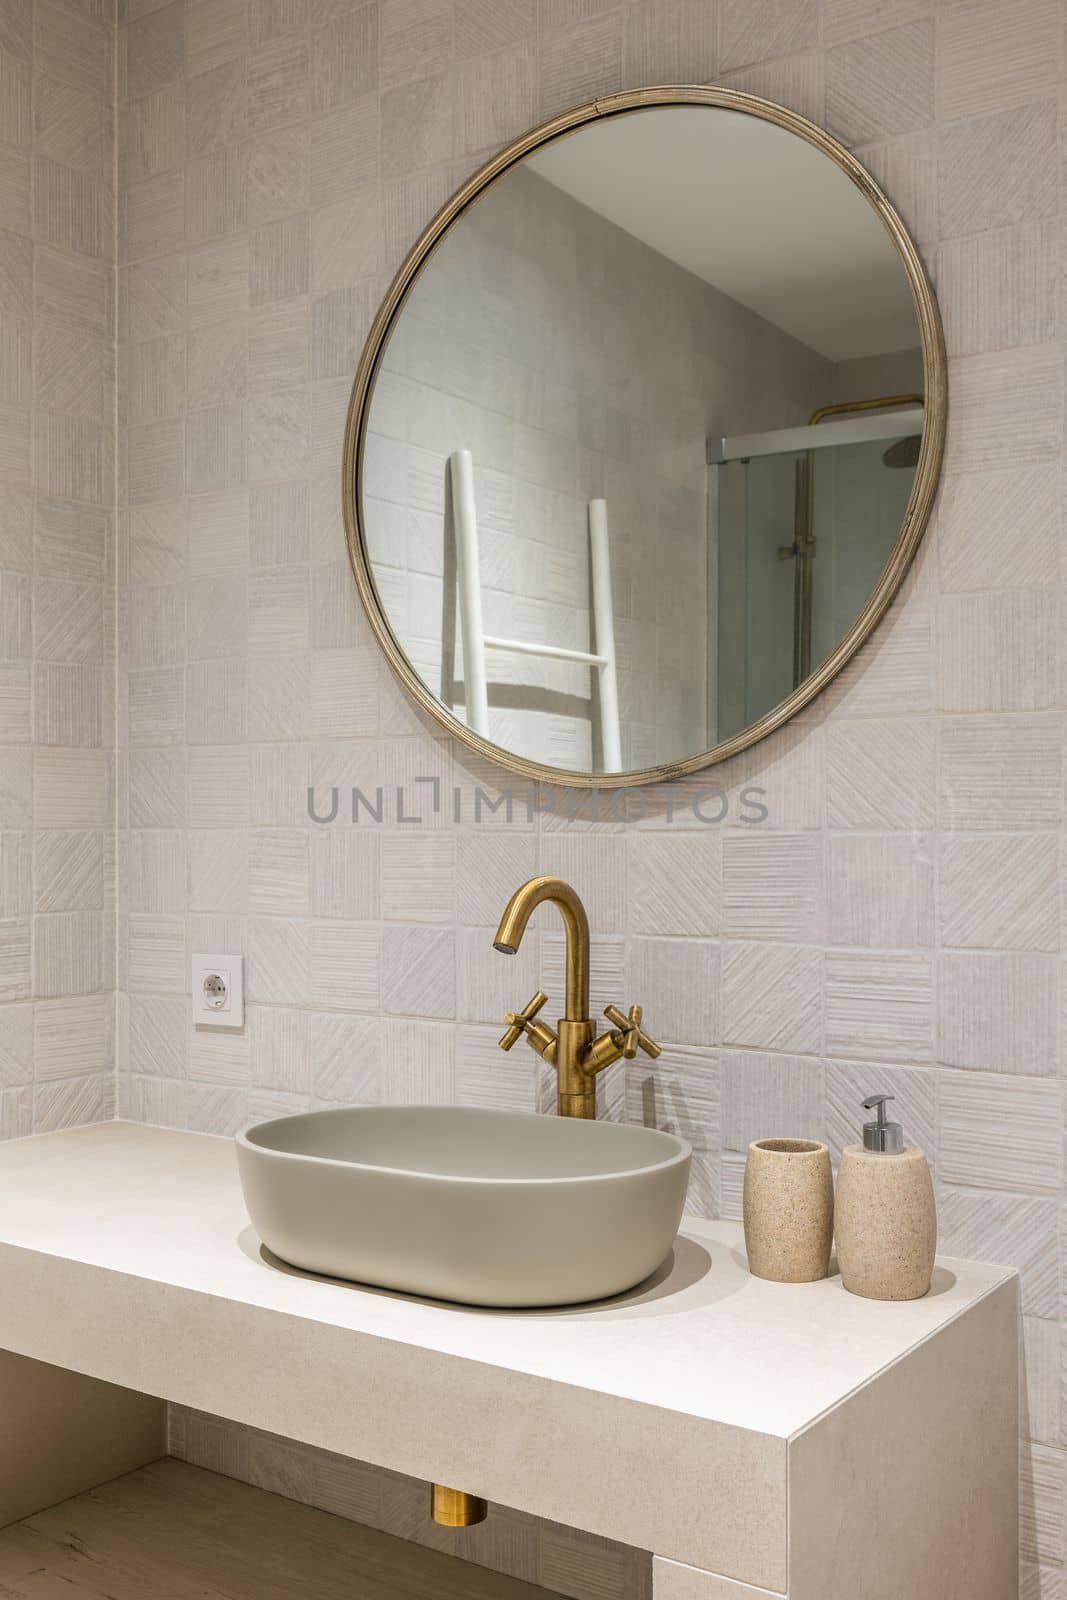 Neat stylish oval-shaped sink on white marble countertop with an elegant copper-coloured faucet. Above sink hangs a round modern gold-framed mirror that reflects part of shower. by apavlin